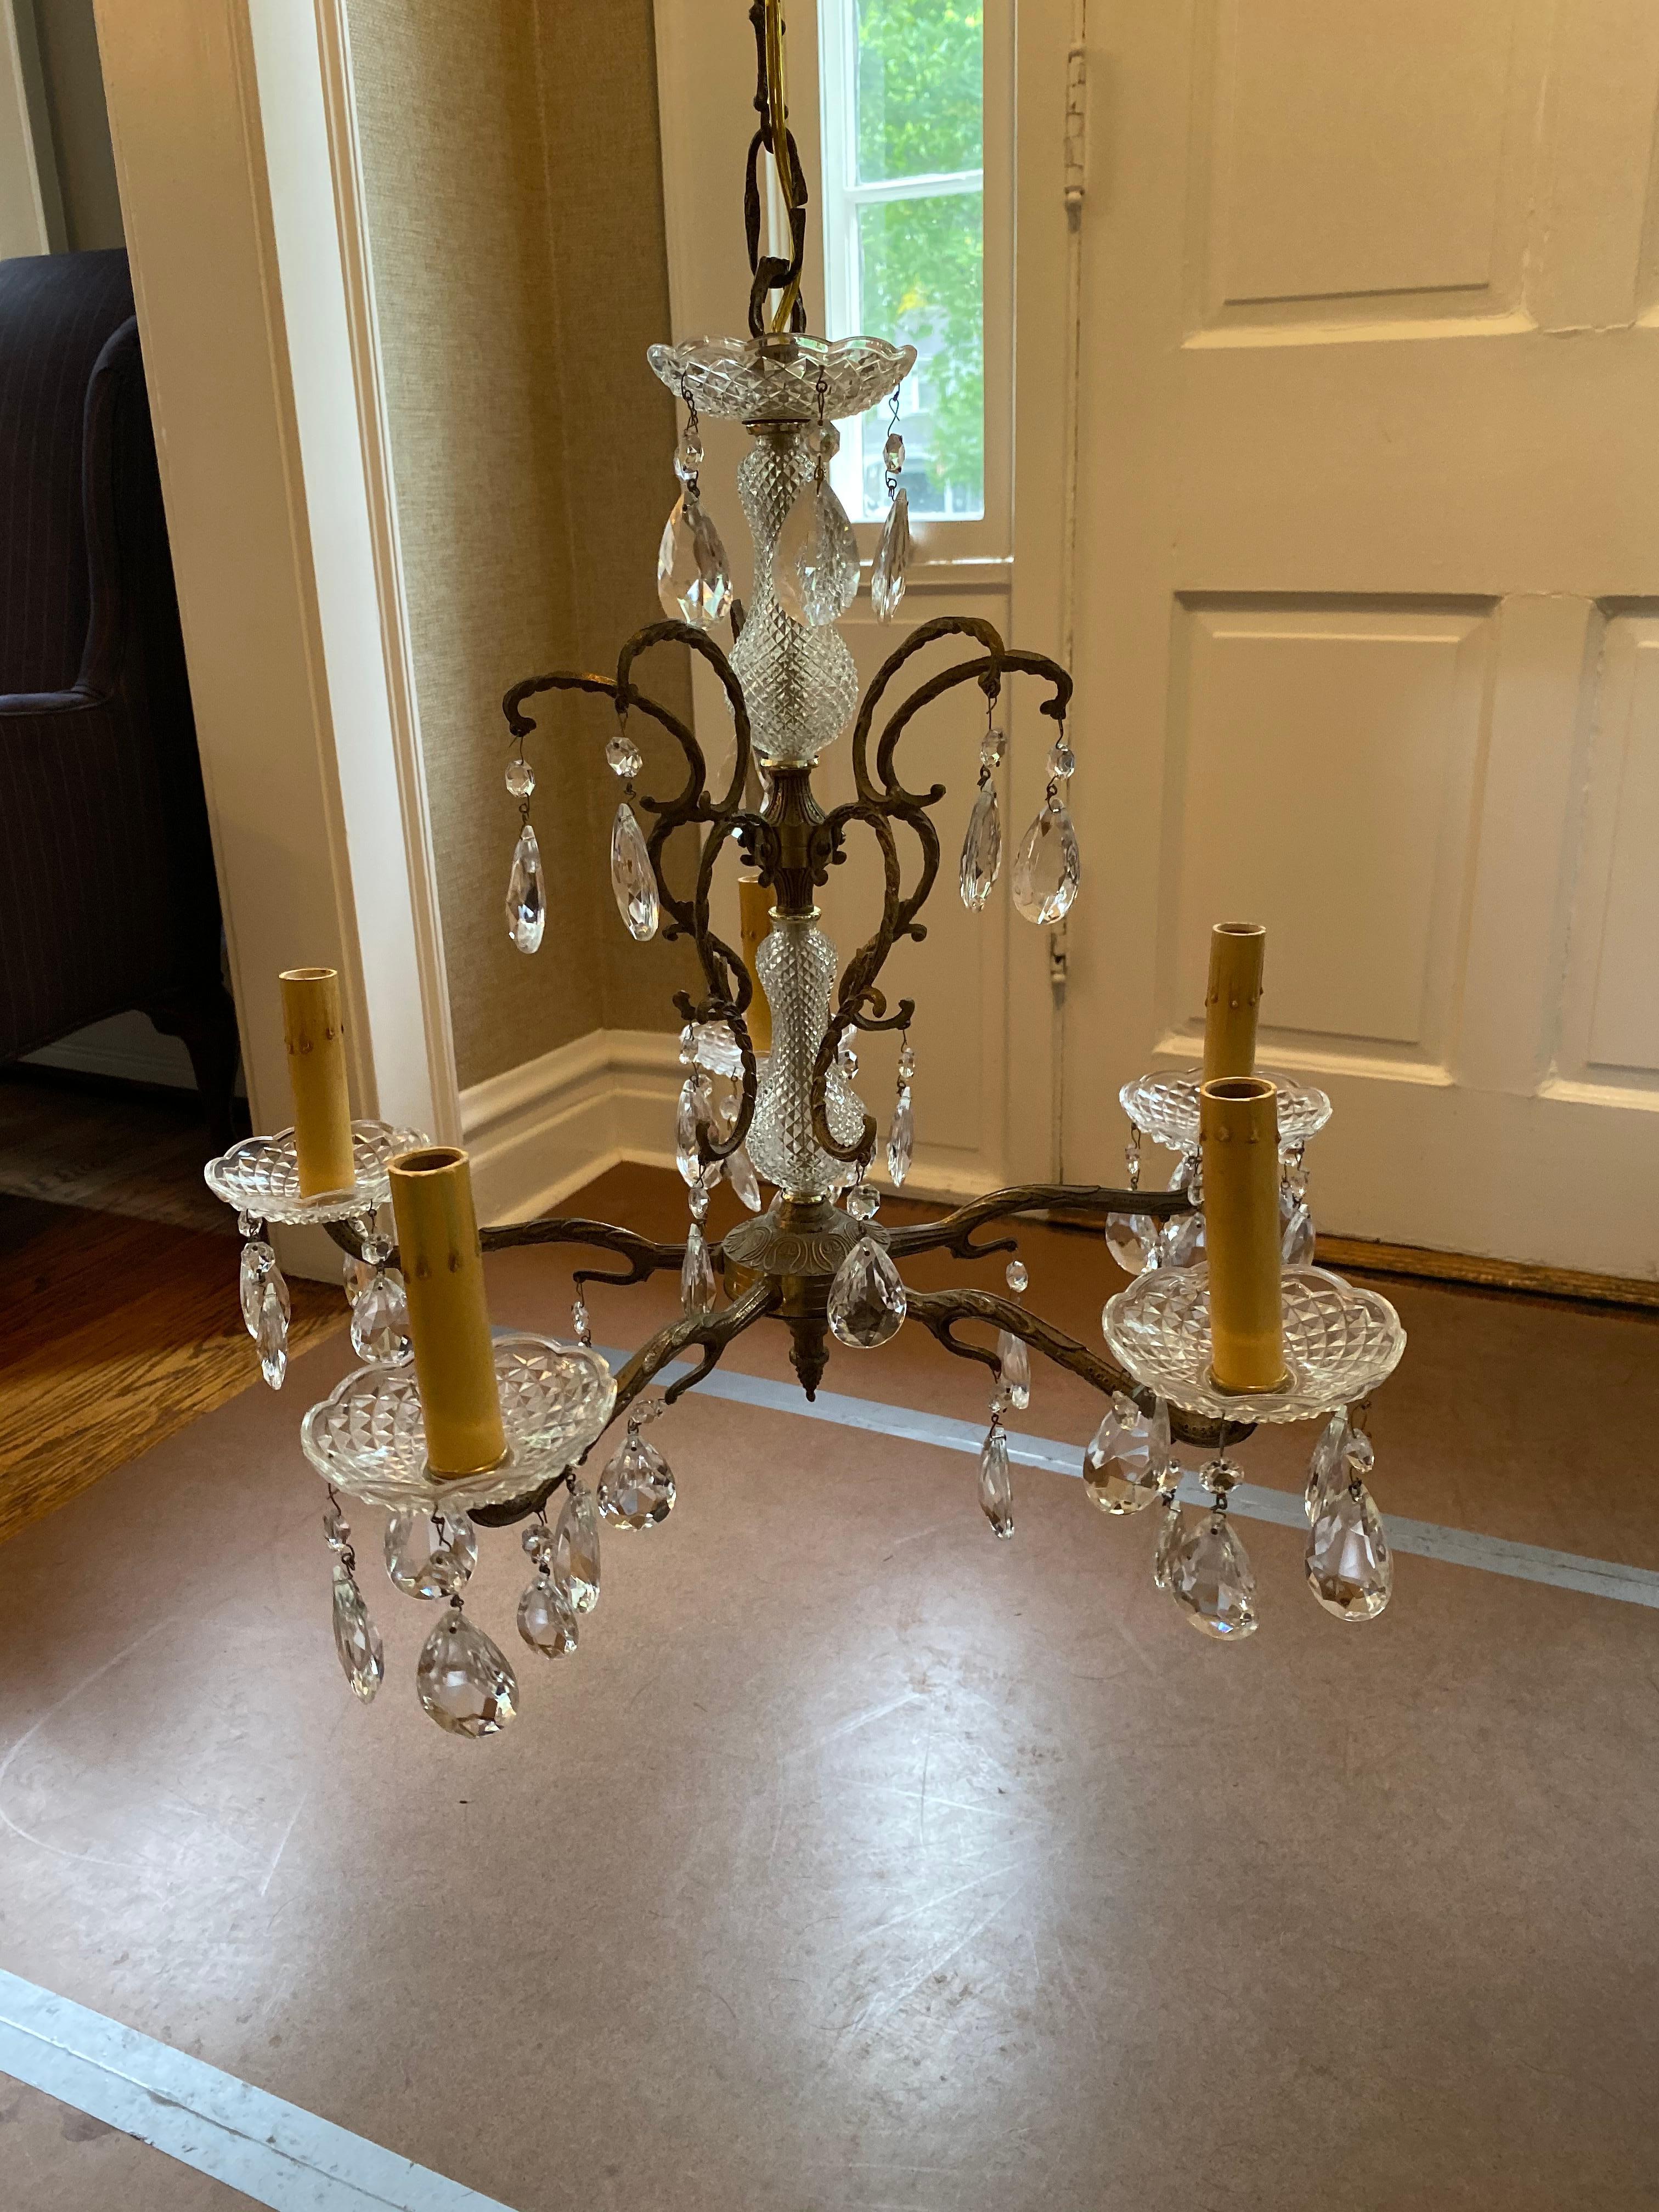 Vintage French Crystal and Bronze Chandelier from Marche Aux Puces, Paris In Good Condition For Sale In Chicago, IL